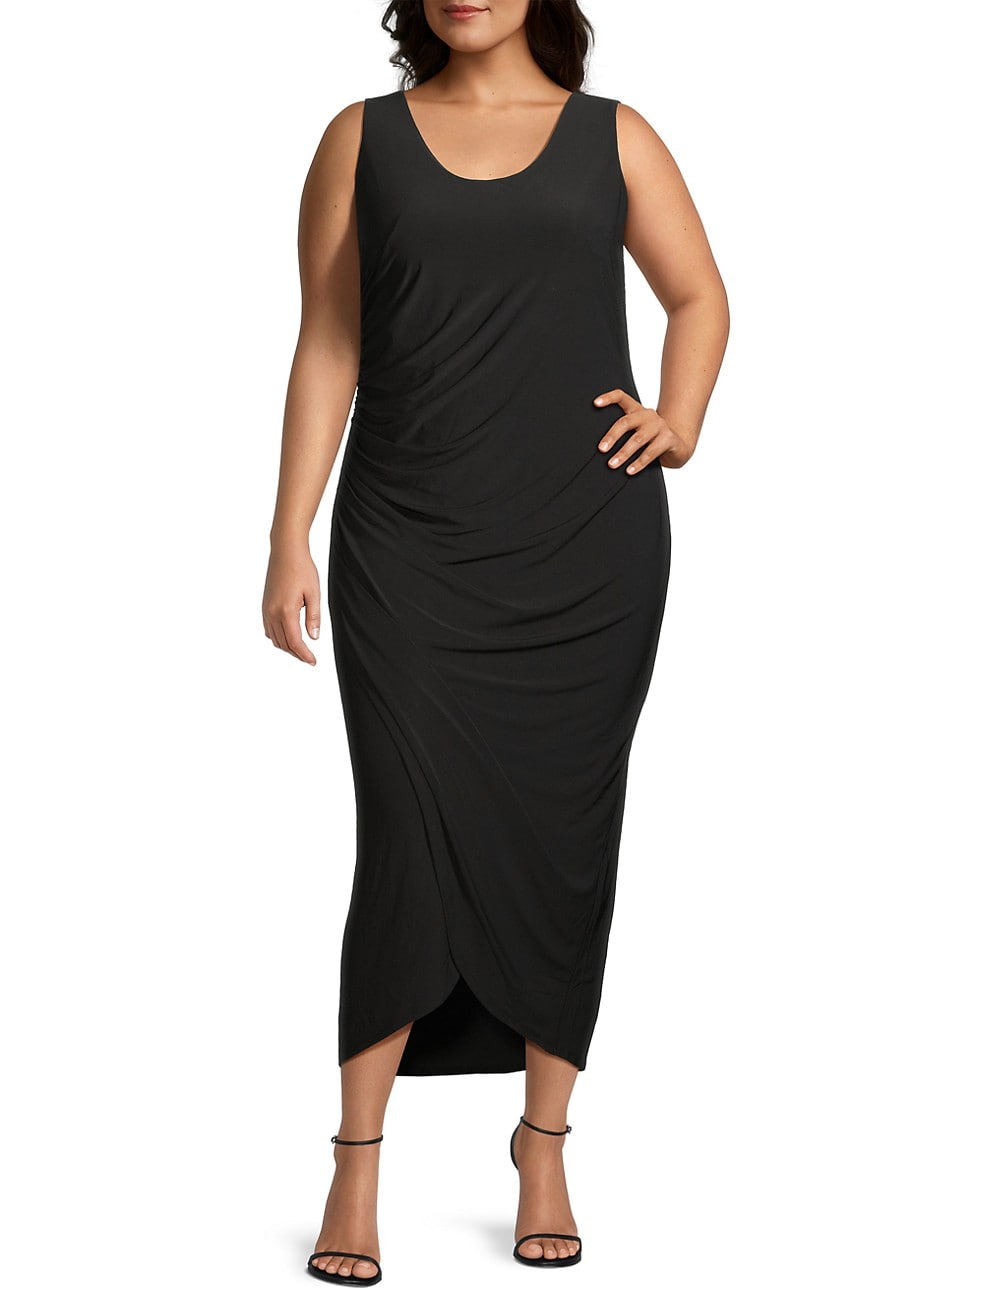 Shop 15 of the Best Jersey Maxi Dresses to Wear All Summer | Who What Wear